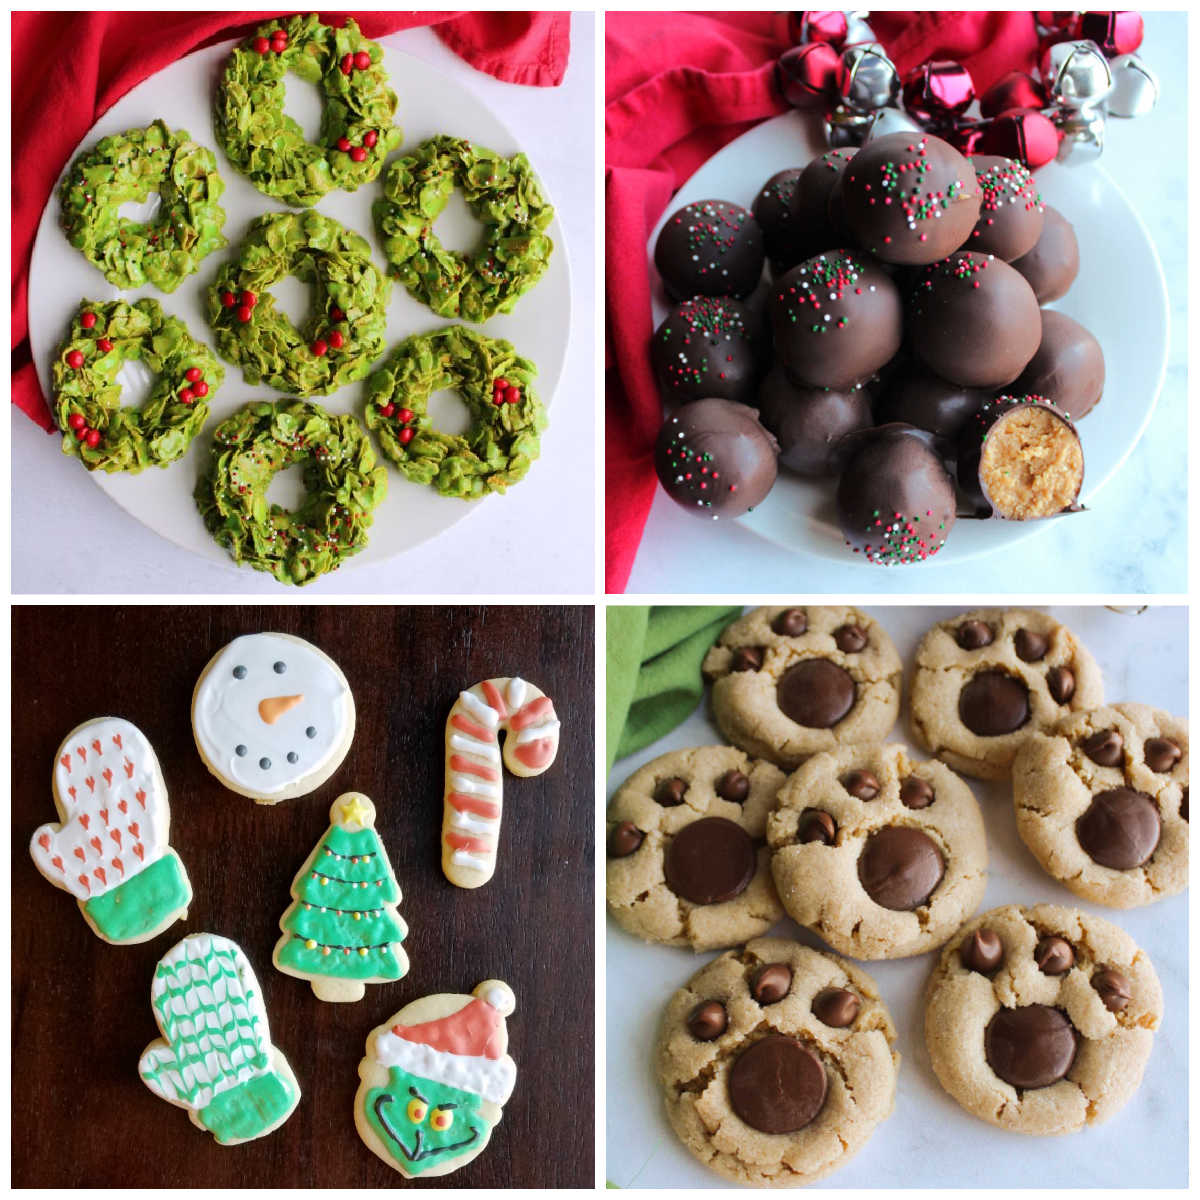 Are you ready to start planning your Christmas menu? Then you are in the right place! These recipes are sure to make this year's spread one to remember. There is everything from breakfast to appetizers, dinner and of course plenty of cookies!